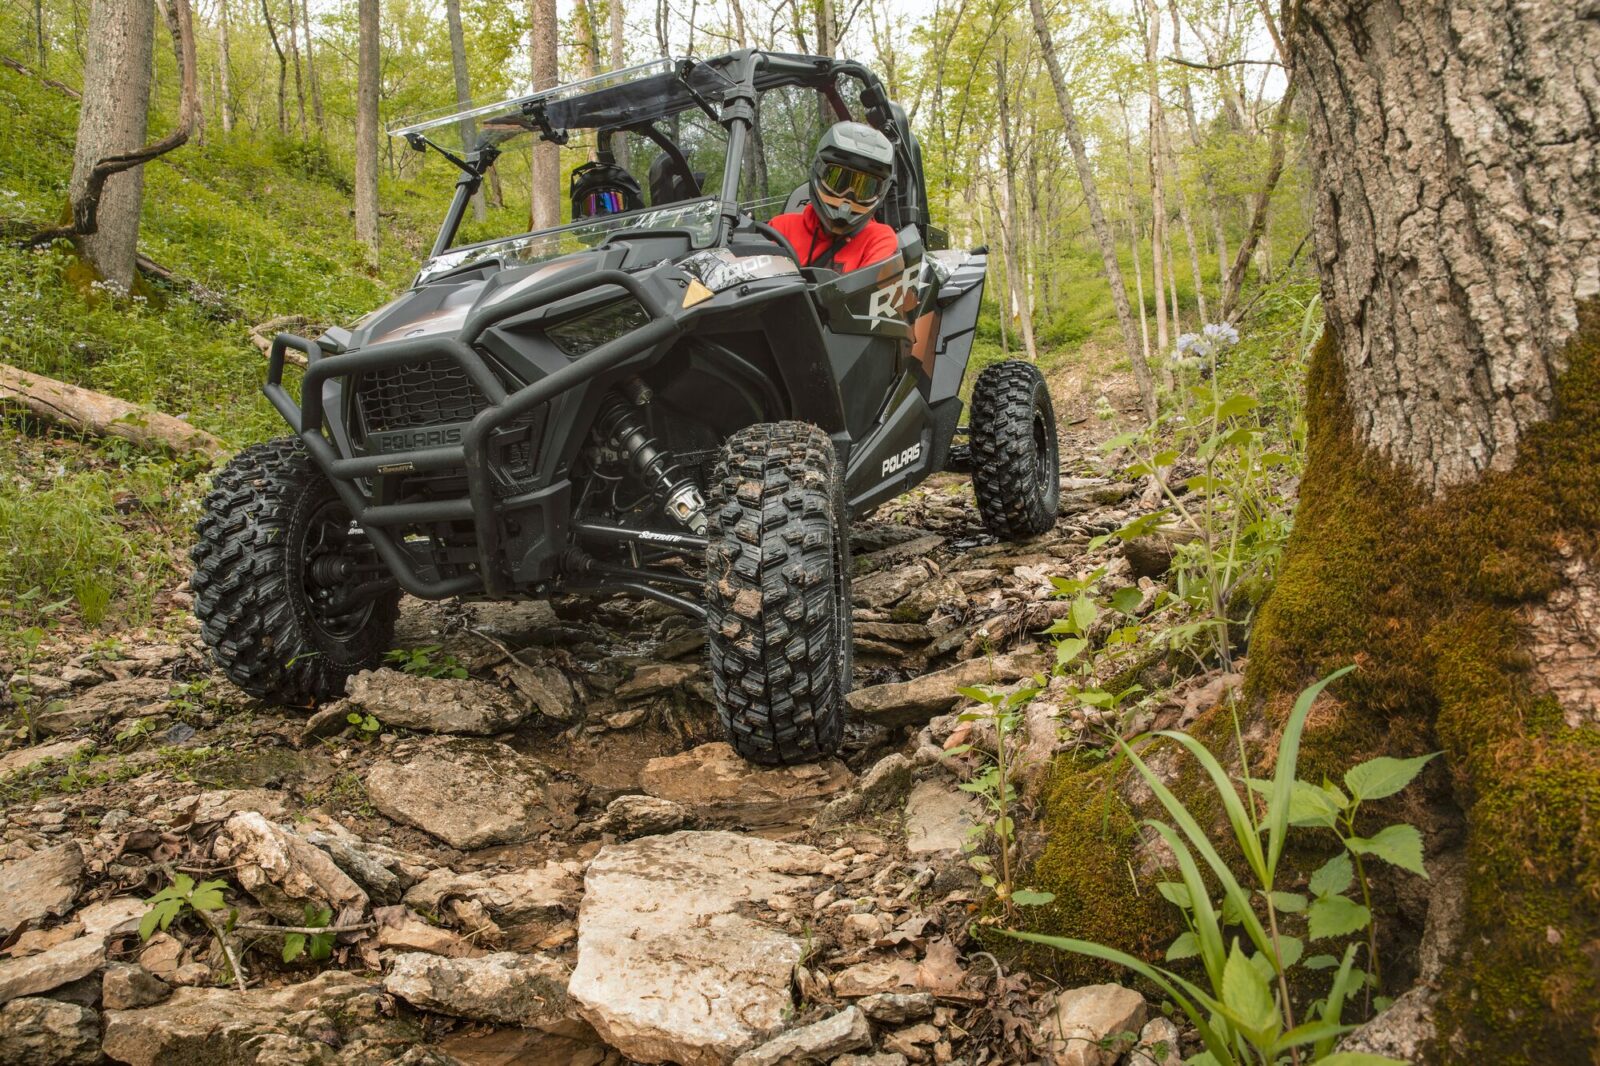 An ATV off-roading on an OHV trail 